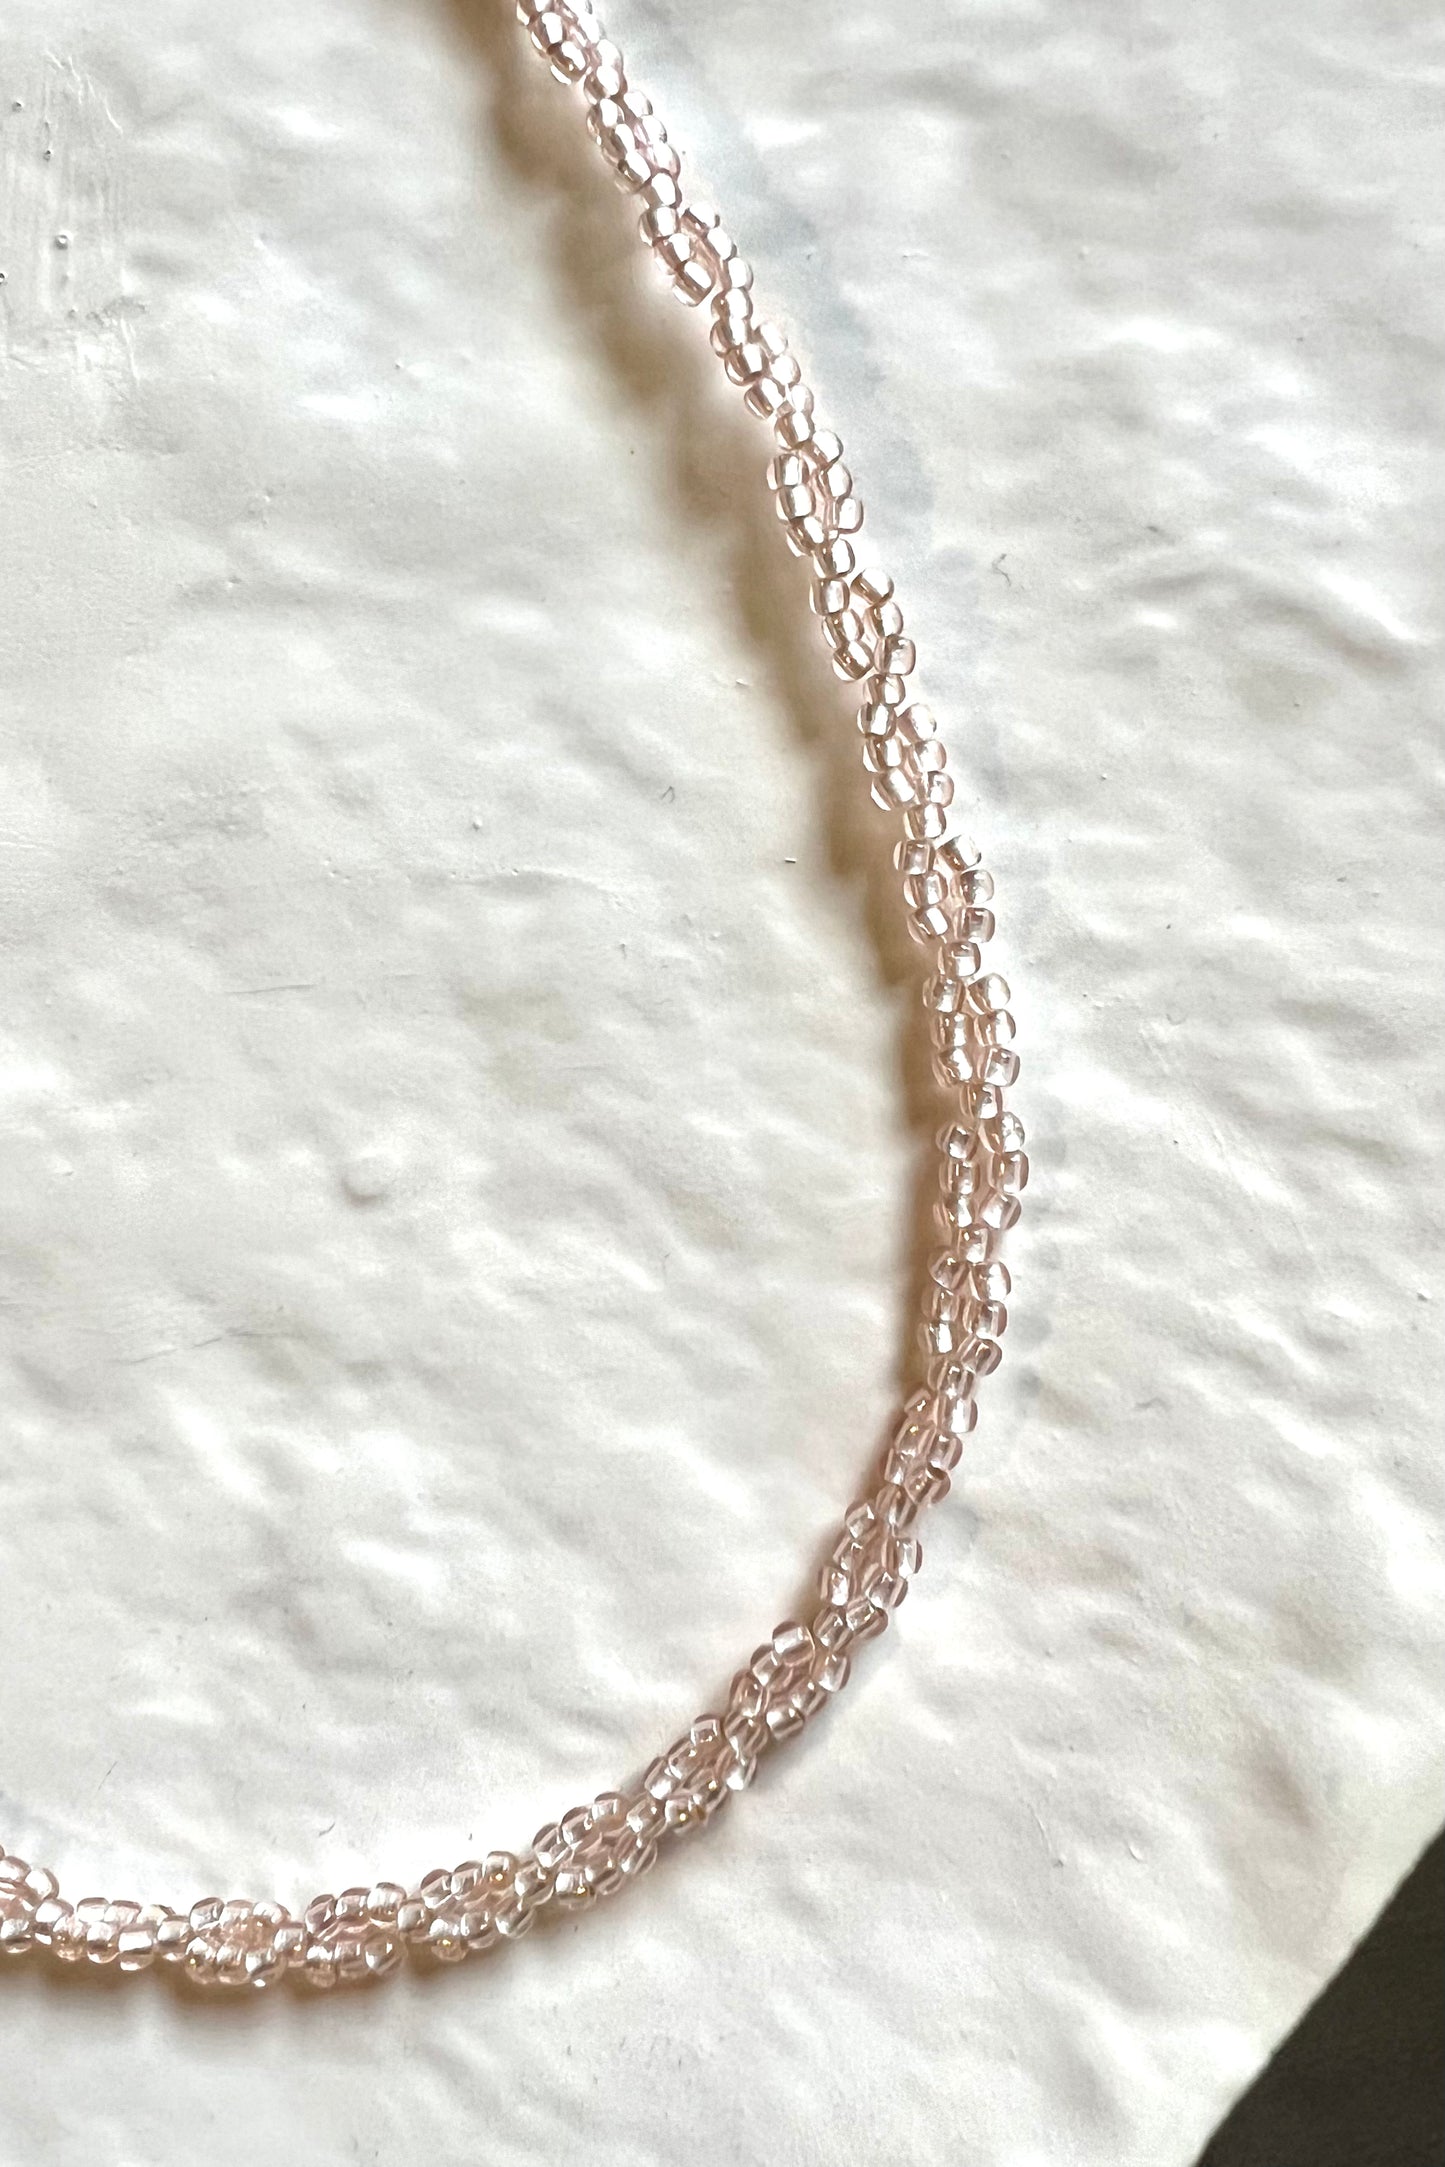 A zoomed in photo of the choker, highlighting the color and patter of the beads. The choker is placed on a textured, white clay plate.